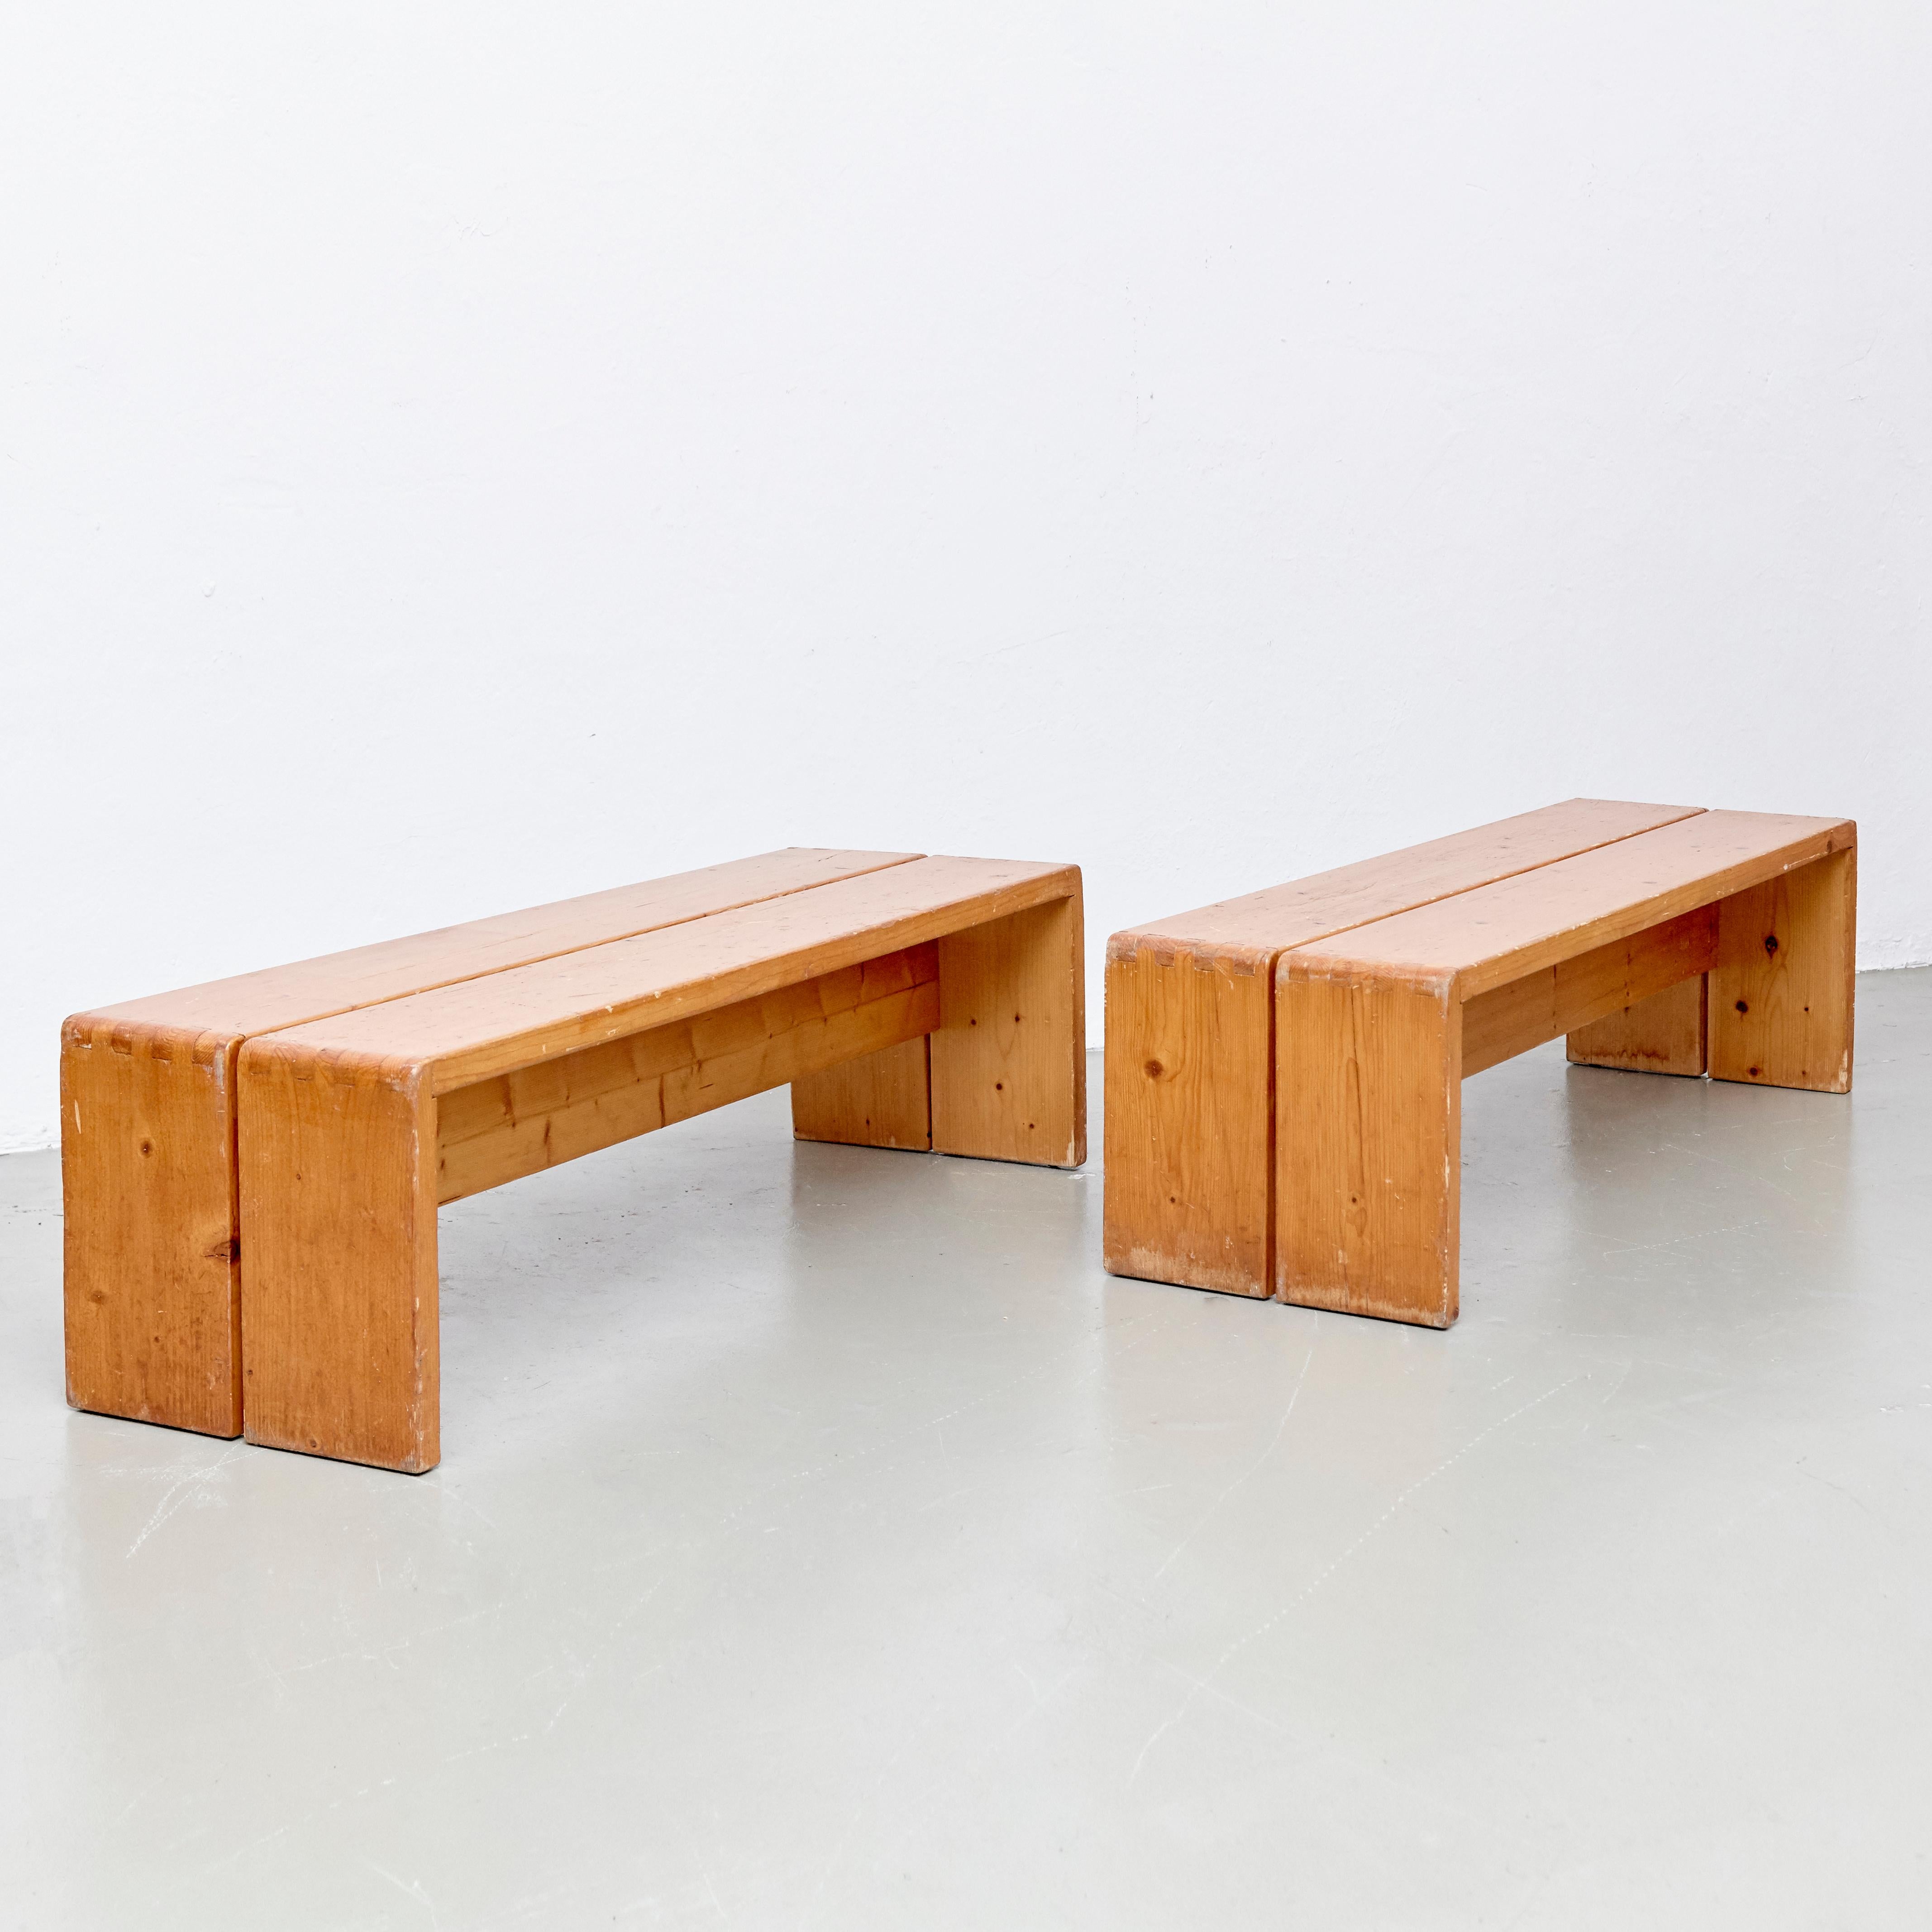 Benches designed by Charlotte Perriand for Les Arcs ski resort circa 1960, manufactured in France.
Pinewood.

In original condition, with wear consistent with age and use, preserving a beautiful patina.

Charlotte Perriand (1903-1999). She was